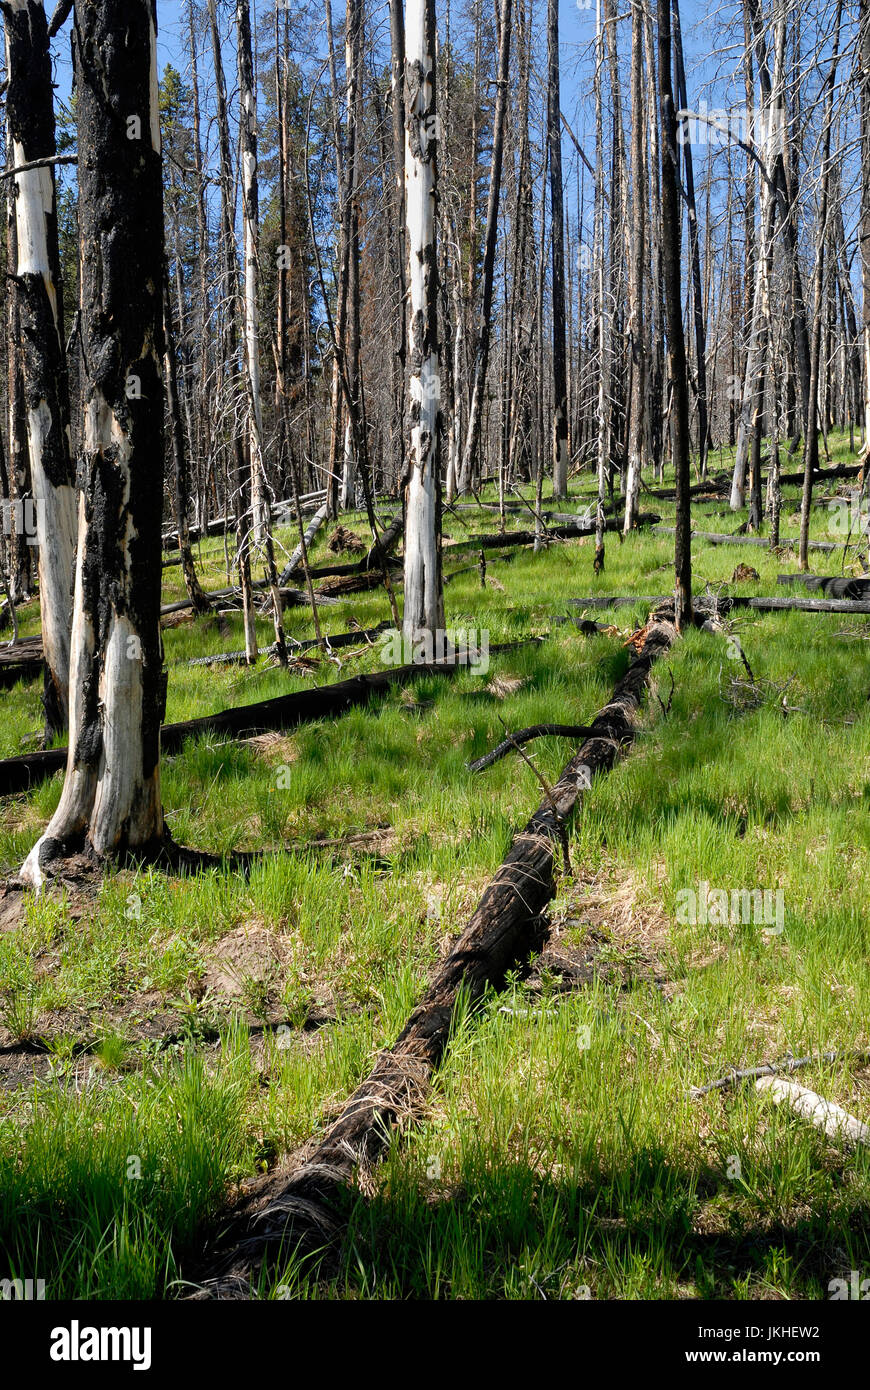 New growth vegetation after fire damage, Yellowstone National Park, Wyoming, USA Stock Photo